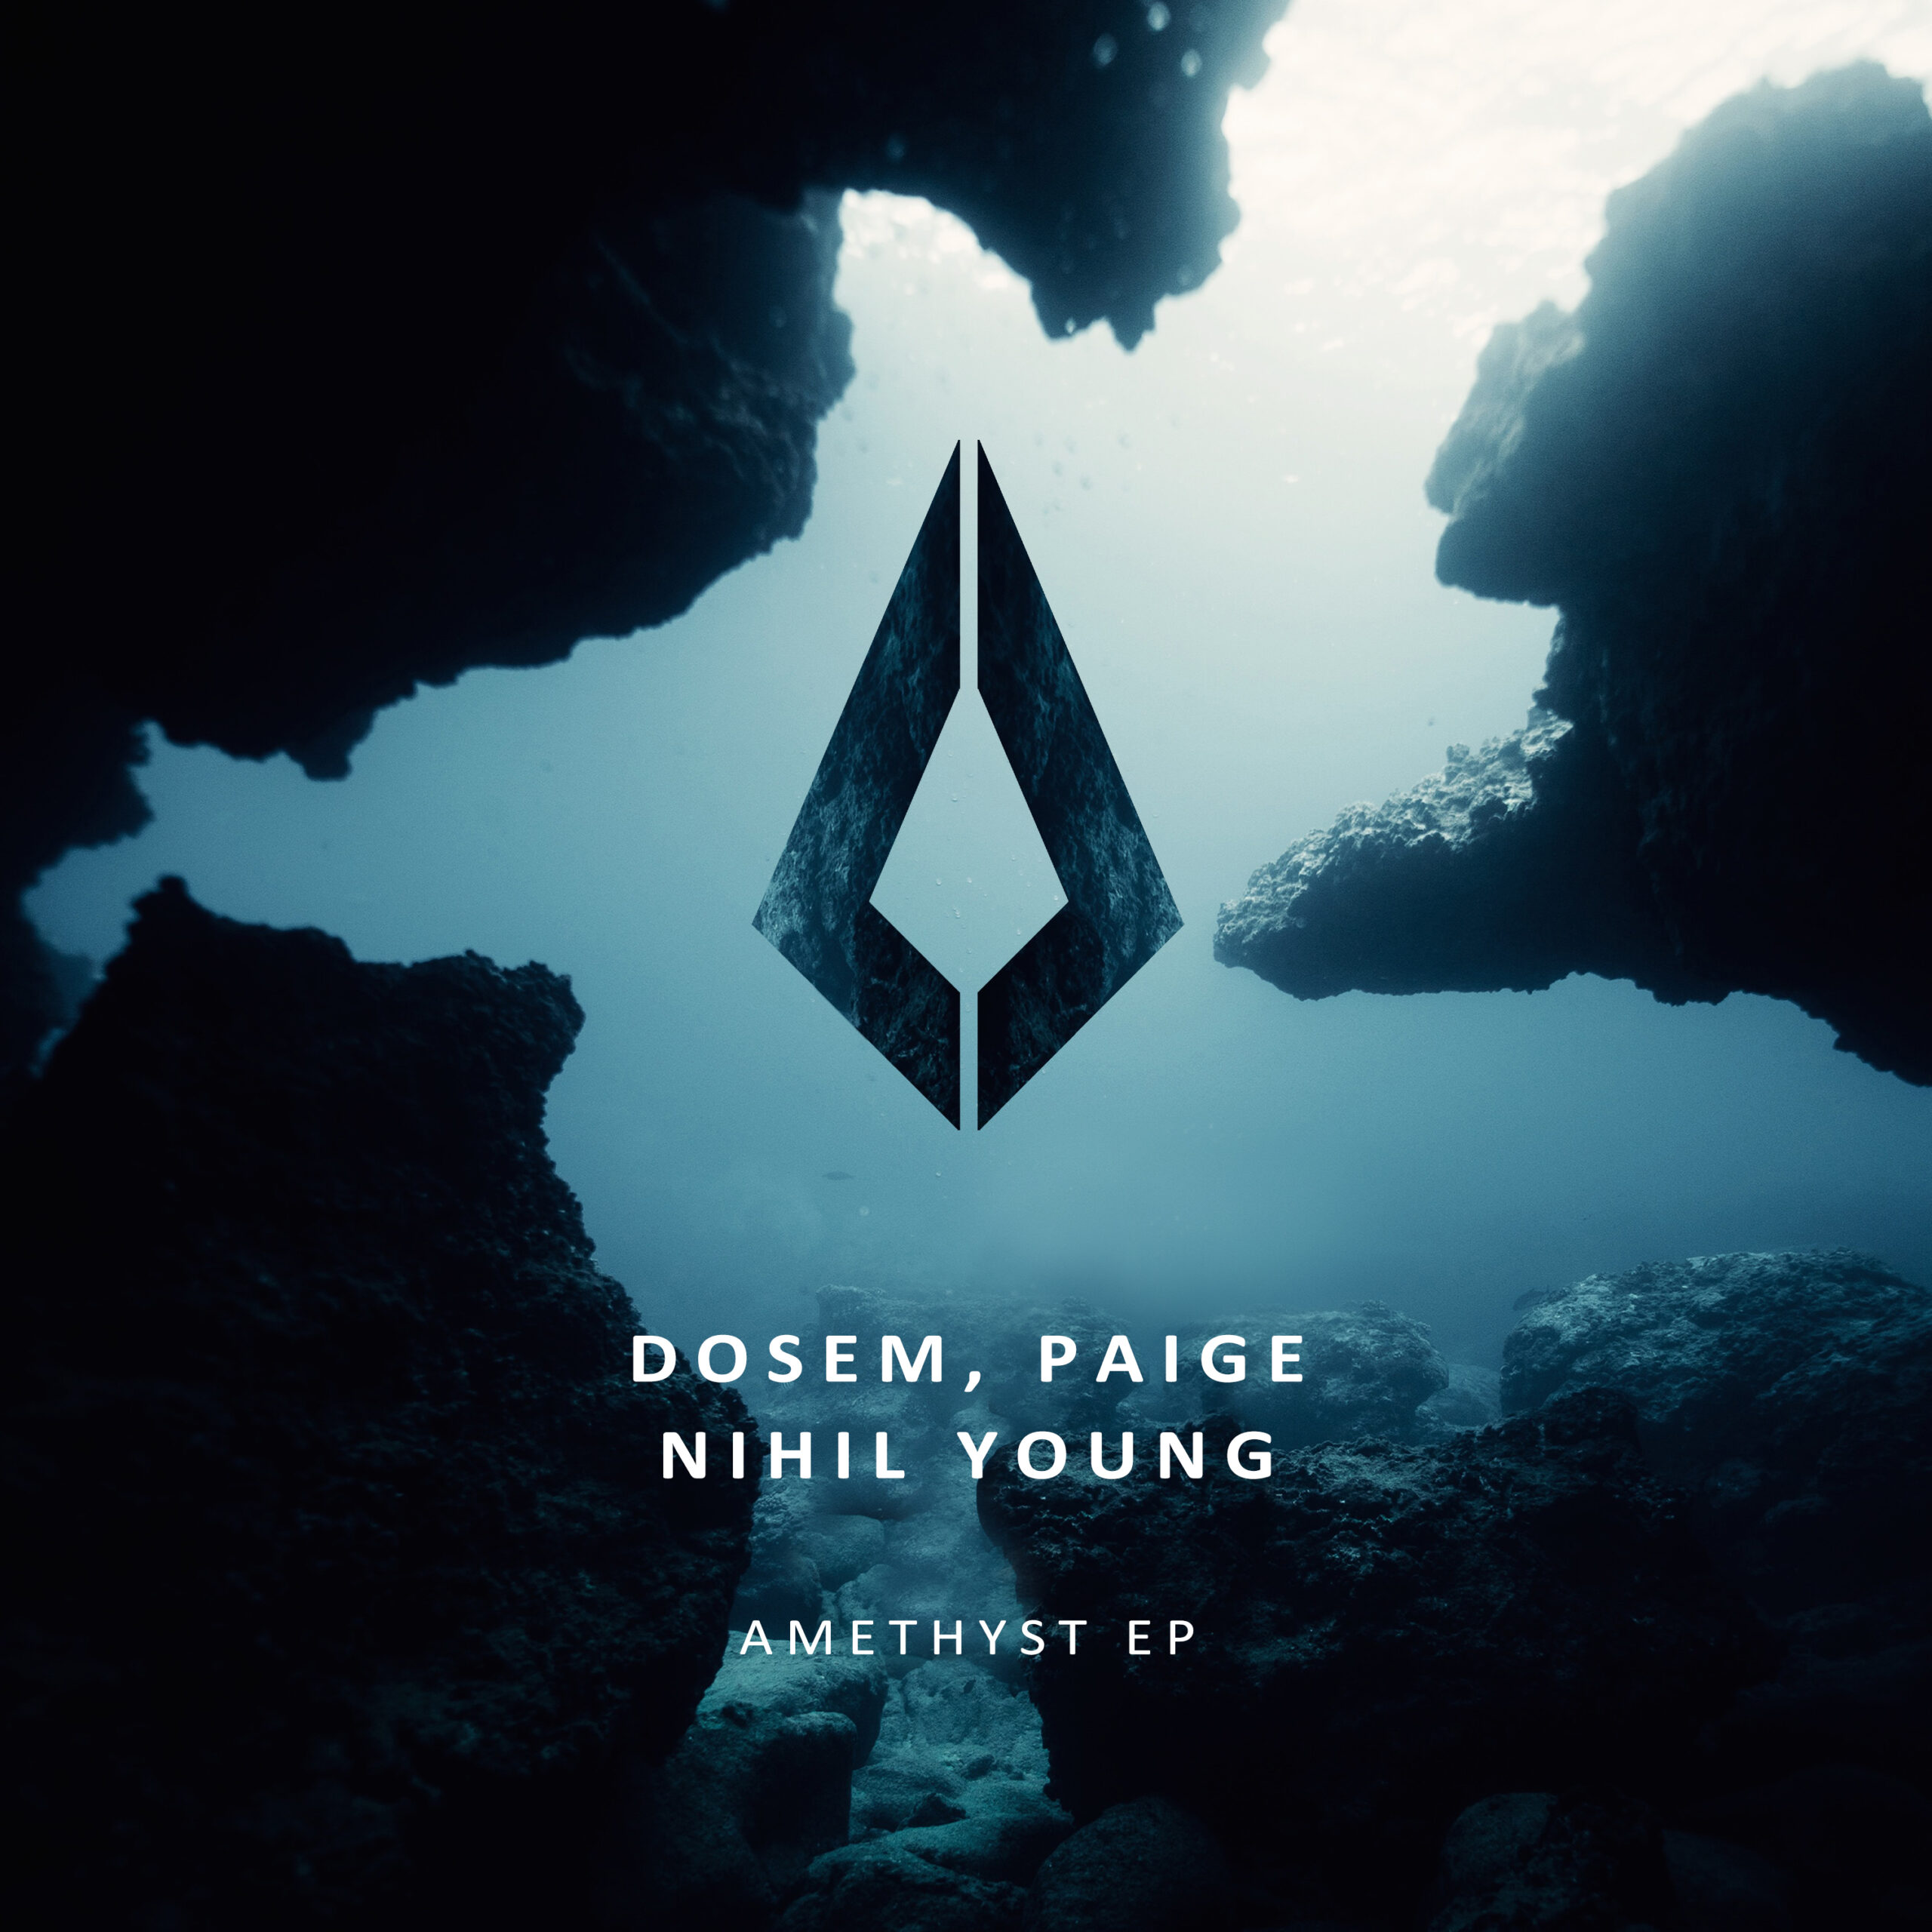 Dosem, Paige & Nihil Young Unite for ‘Amethyst’ EP